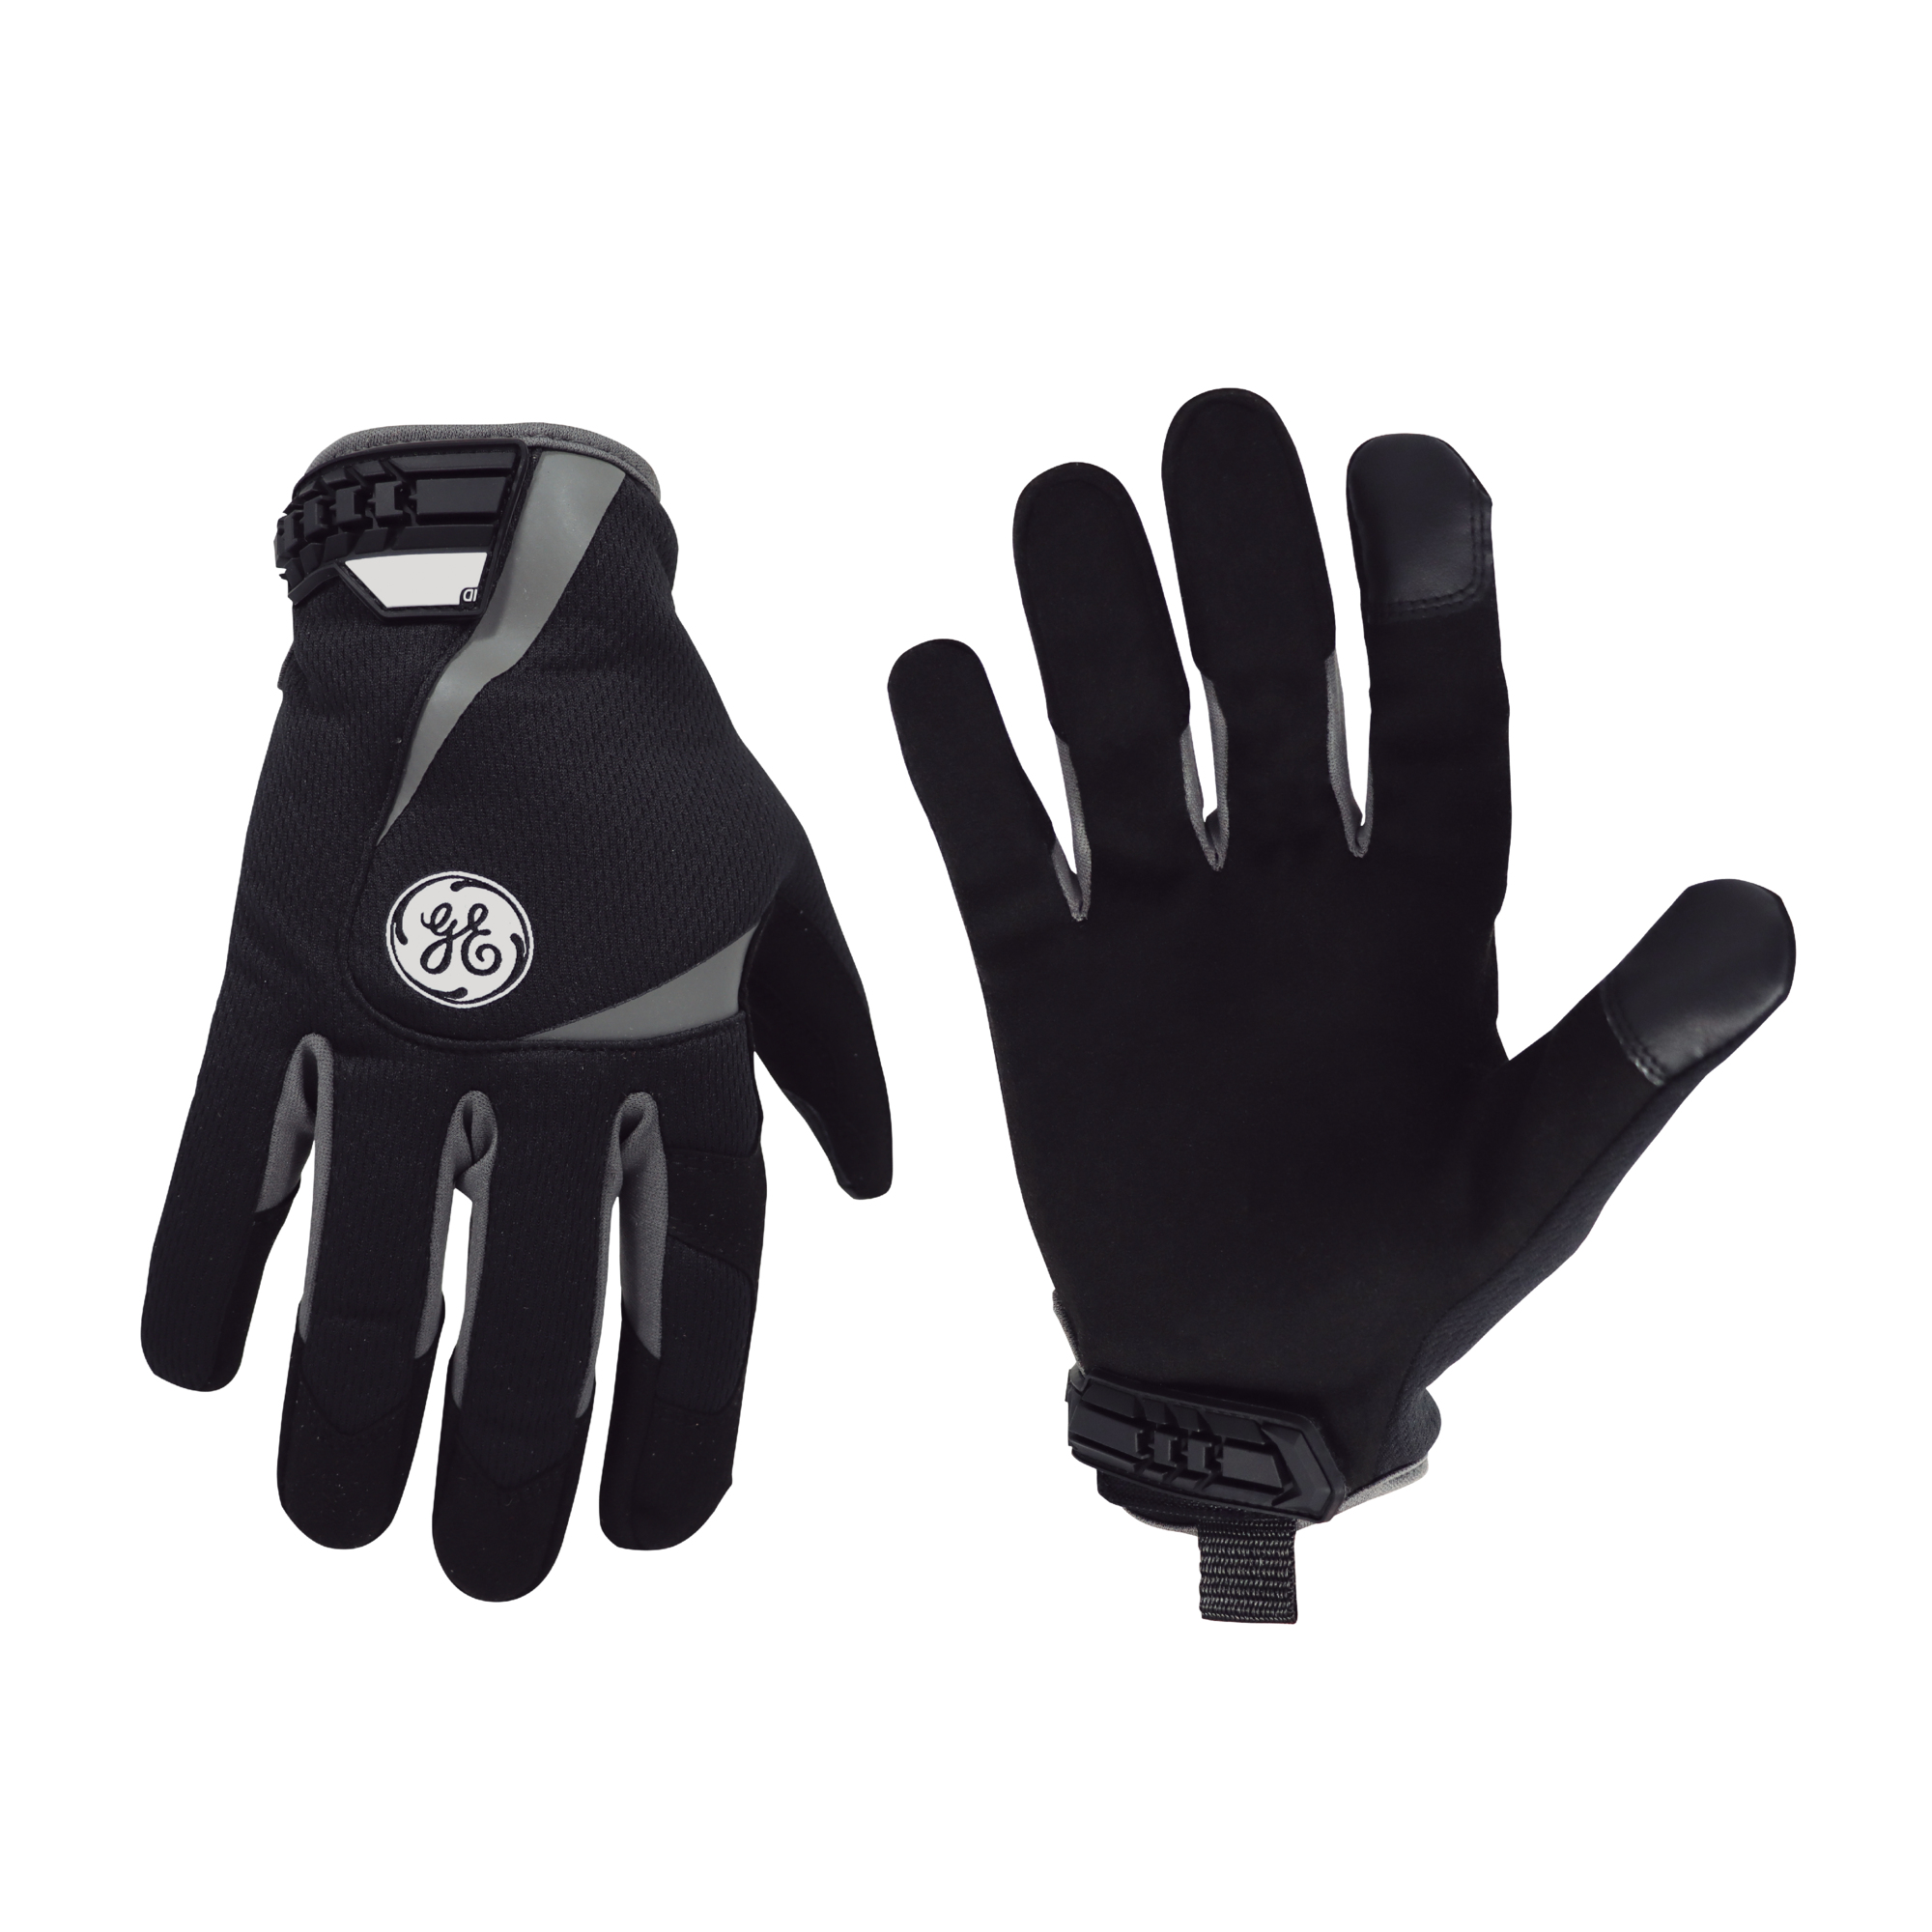 General Electric, Mechanic's Glove Black/Gray M 1 pair, Size M, Included (qty.) 1, Model GG401MC